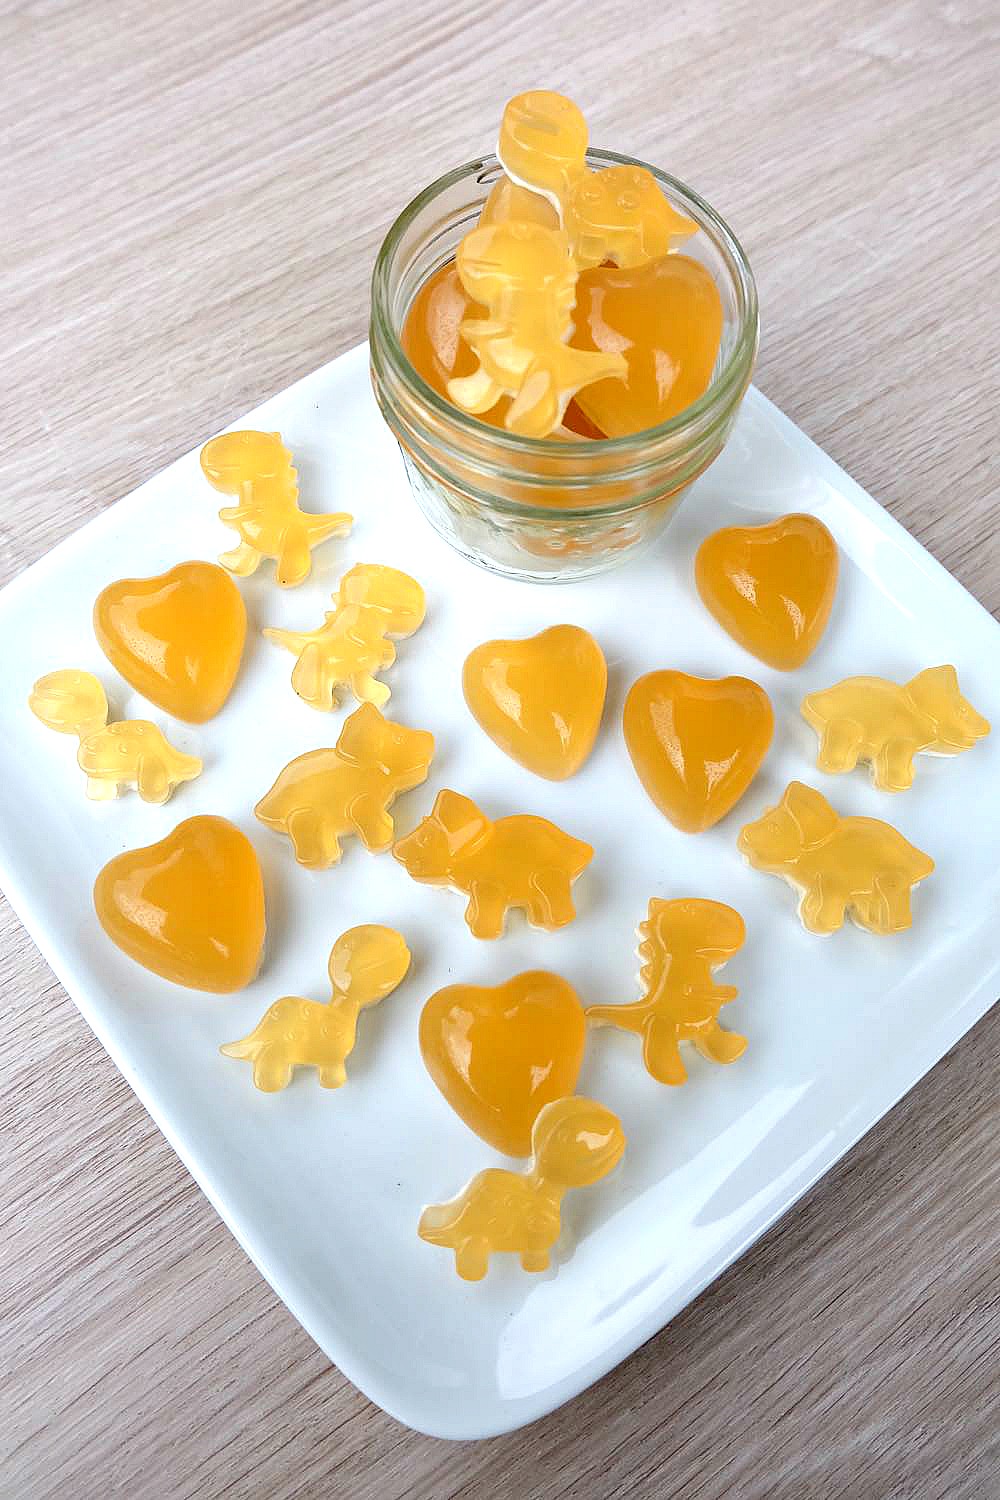 Sooth a sore throat and eliminate cold and flu symptoms with this easy, DIY cold remedy! This sore throat soothing gummies recipe has only four ingredients- lemon, honey, ginger and gelatin! Perfect for kids and adults!